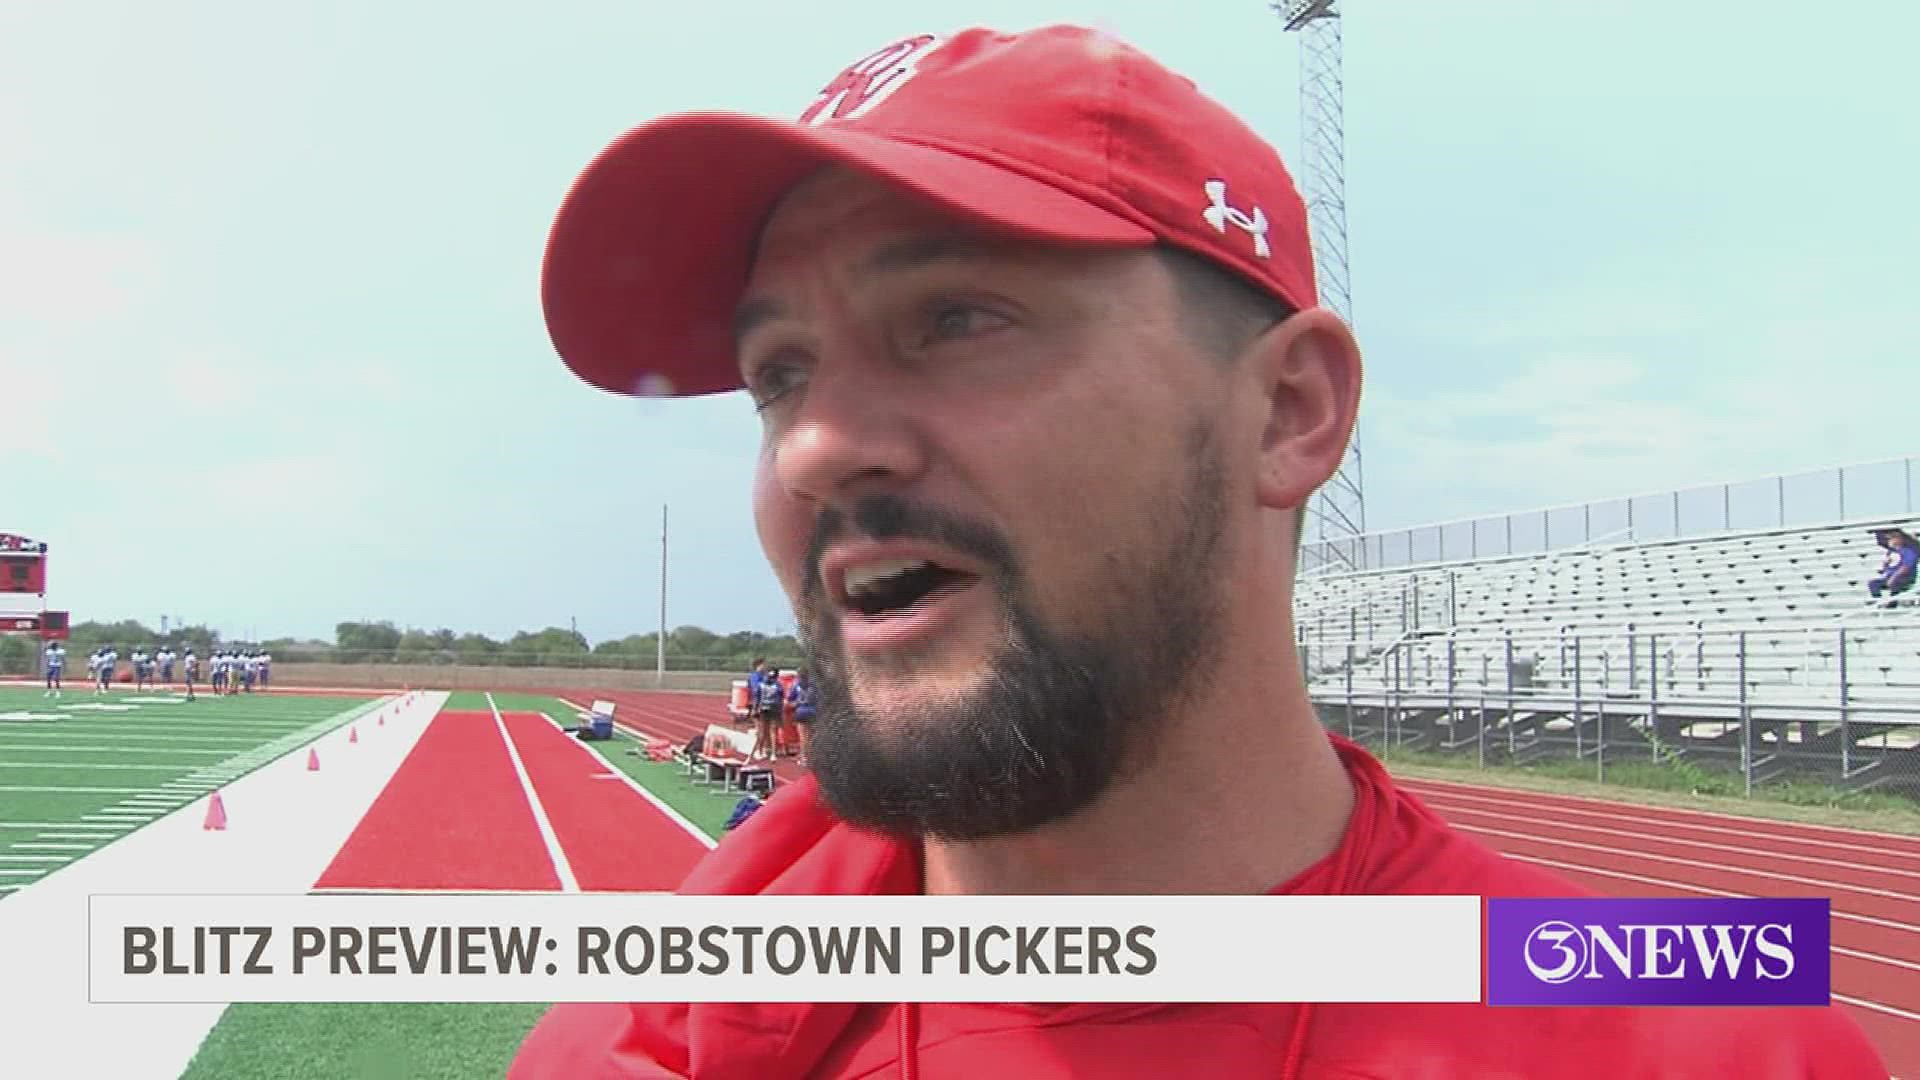 Robstown hasn't made the playoffs since 2010, but Coach Gage Perry says he feels his team is closer to the postseason than most believe.